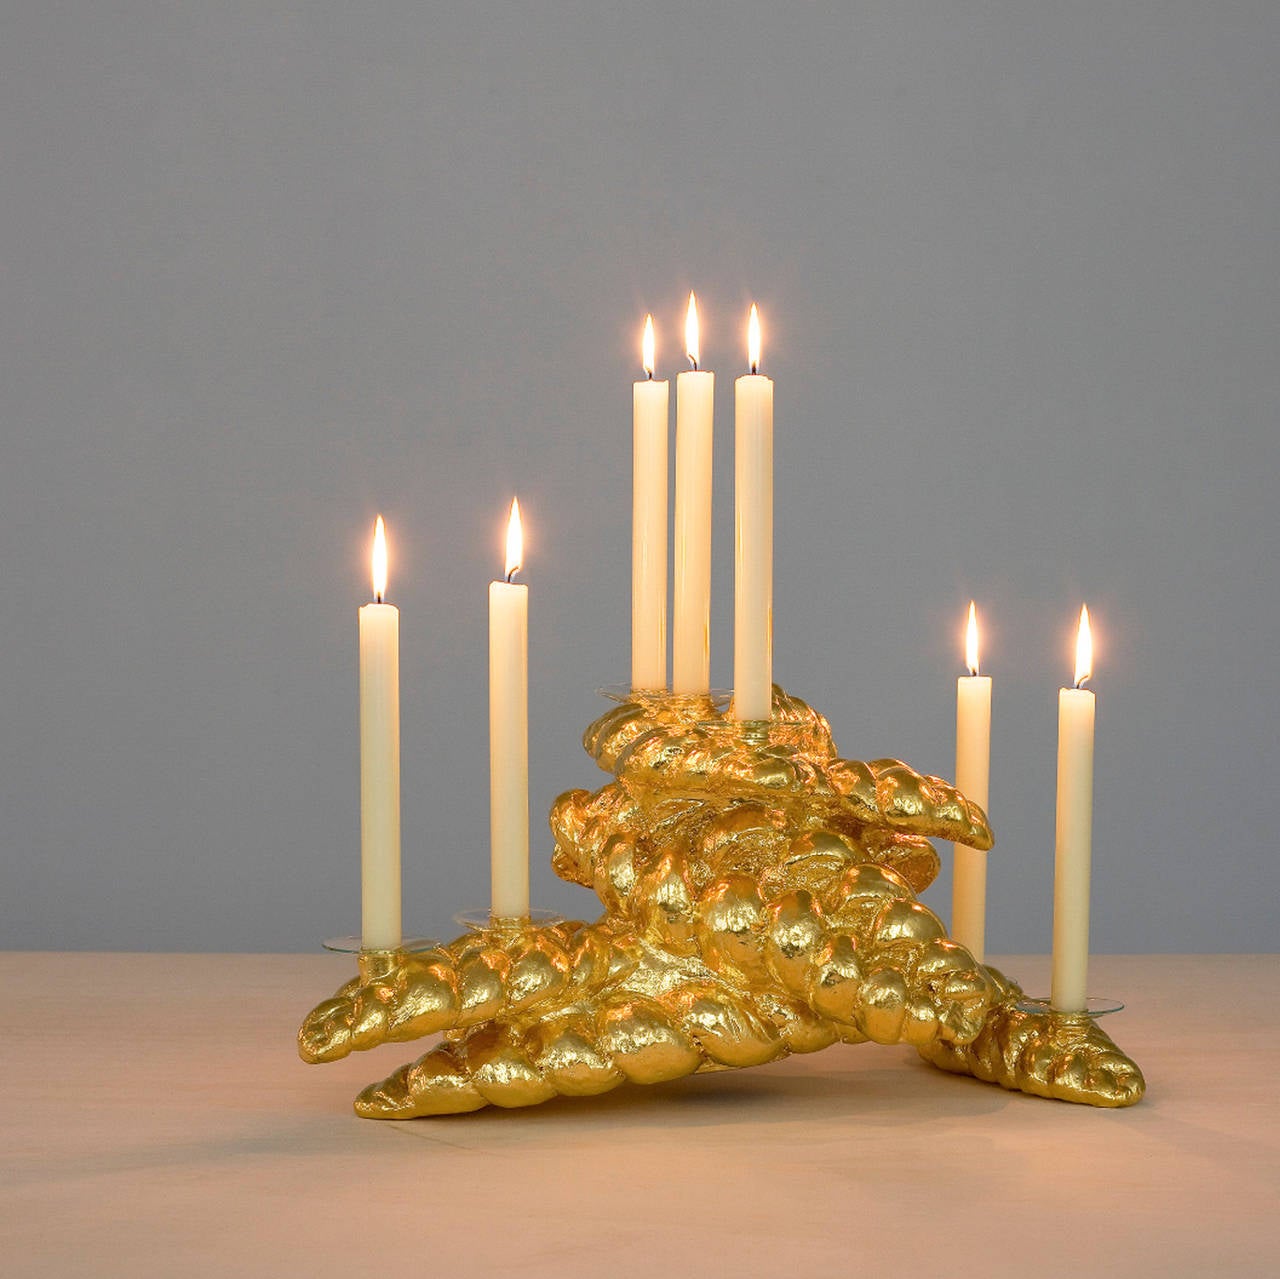 Manna, no. 2/5, is a candlestick consisting of 7 different loaves of braided bread (challah) cast in aluminum and gilded with 23.75 carat gold in the series Sun – Wheat – Gold.

 dimensions: 24,5 x 53 x 33 cm.

Kees de Goede is a well-known,